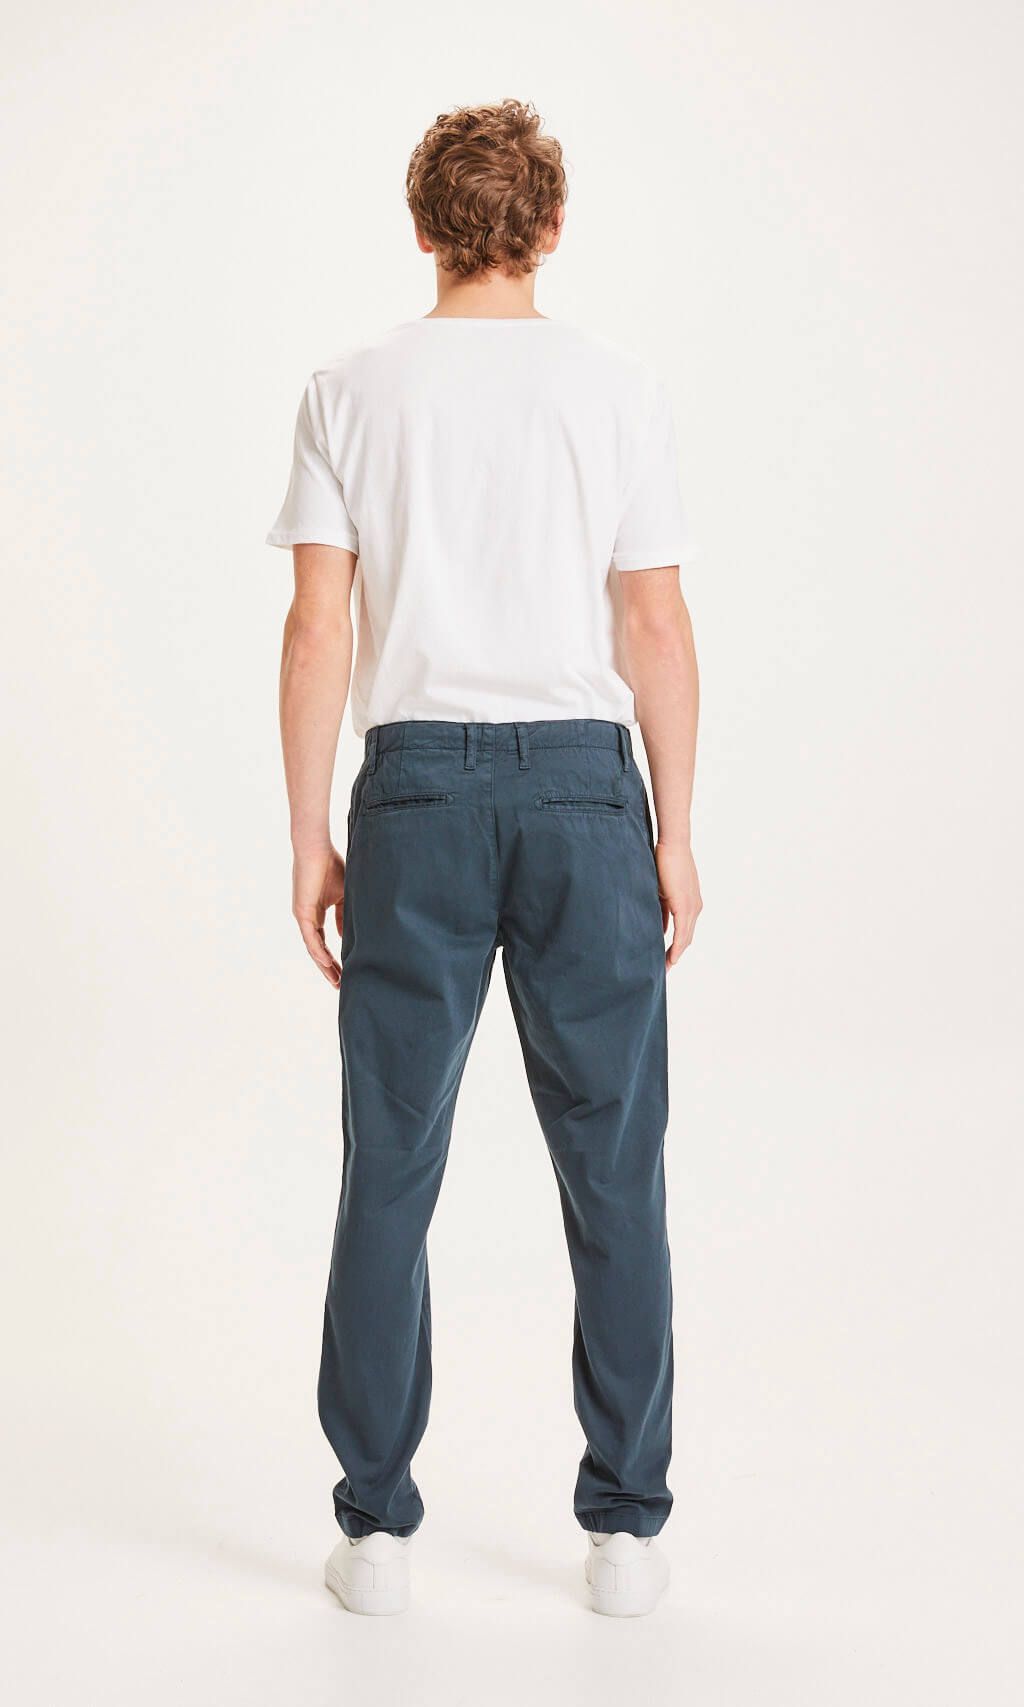 Chuck Regular Stretched Chino Pant Total Eclipse 31/32